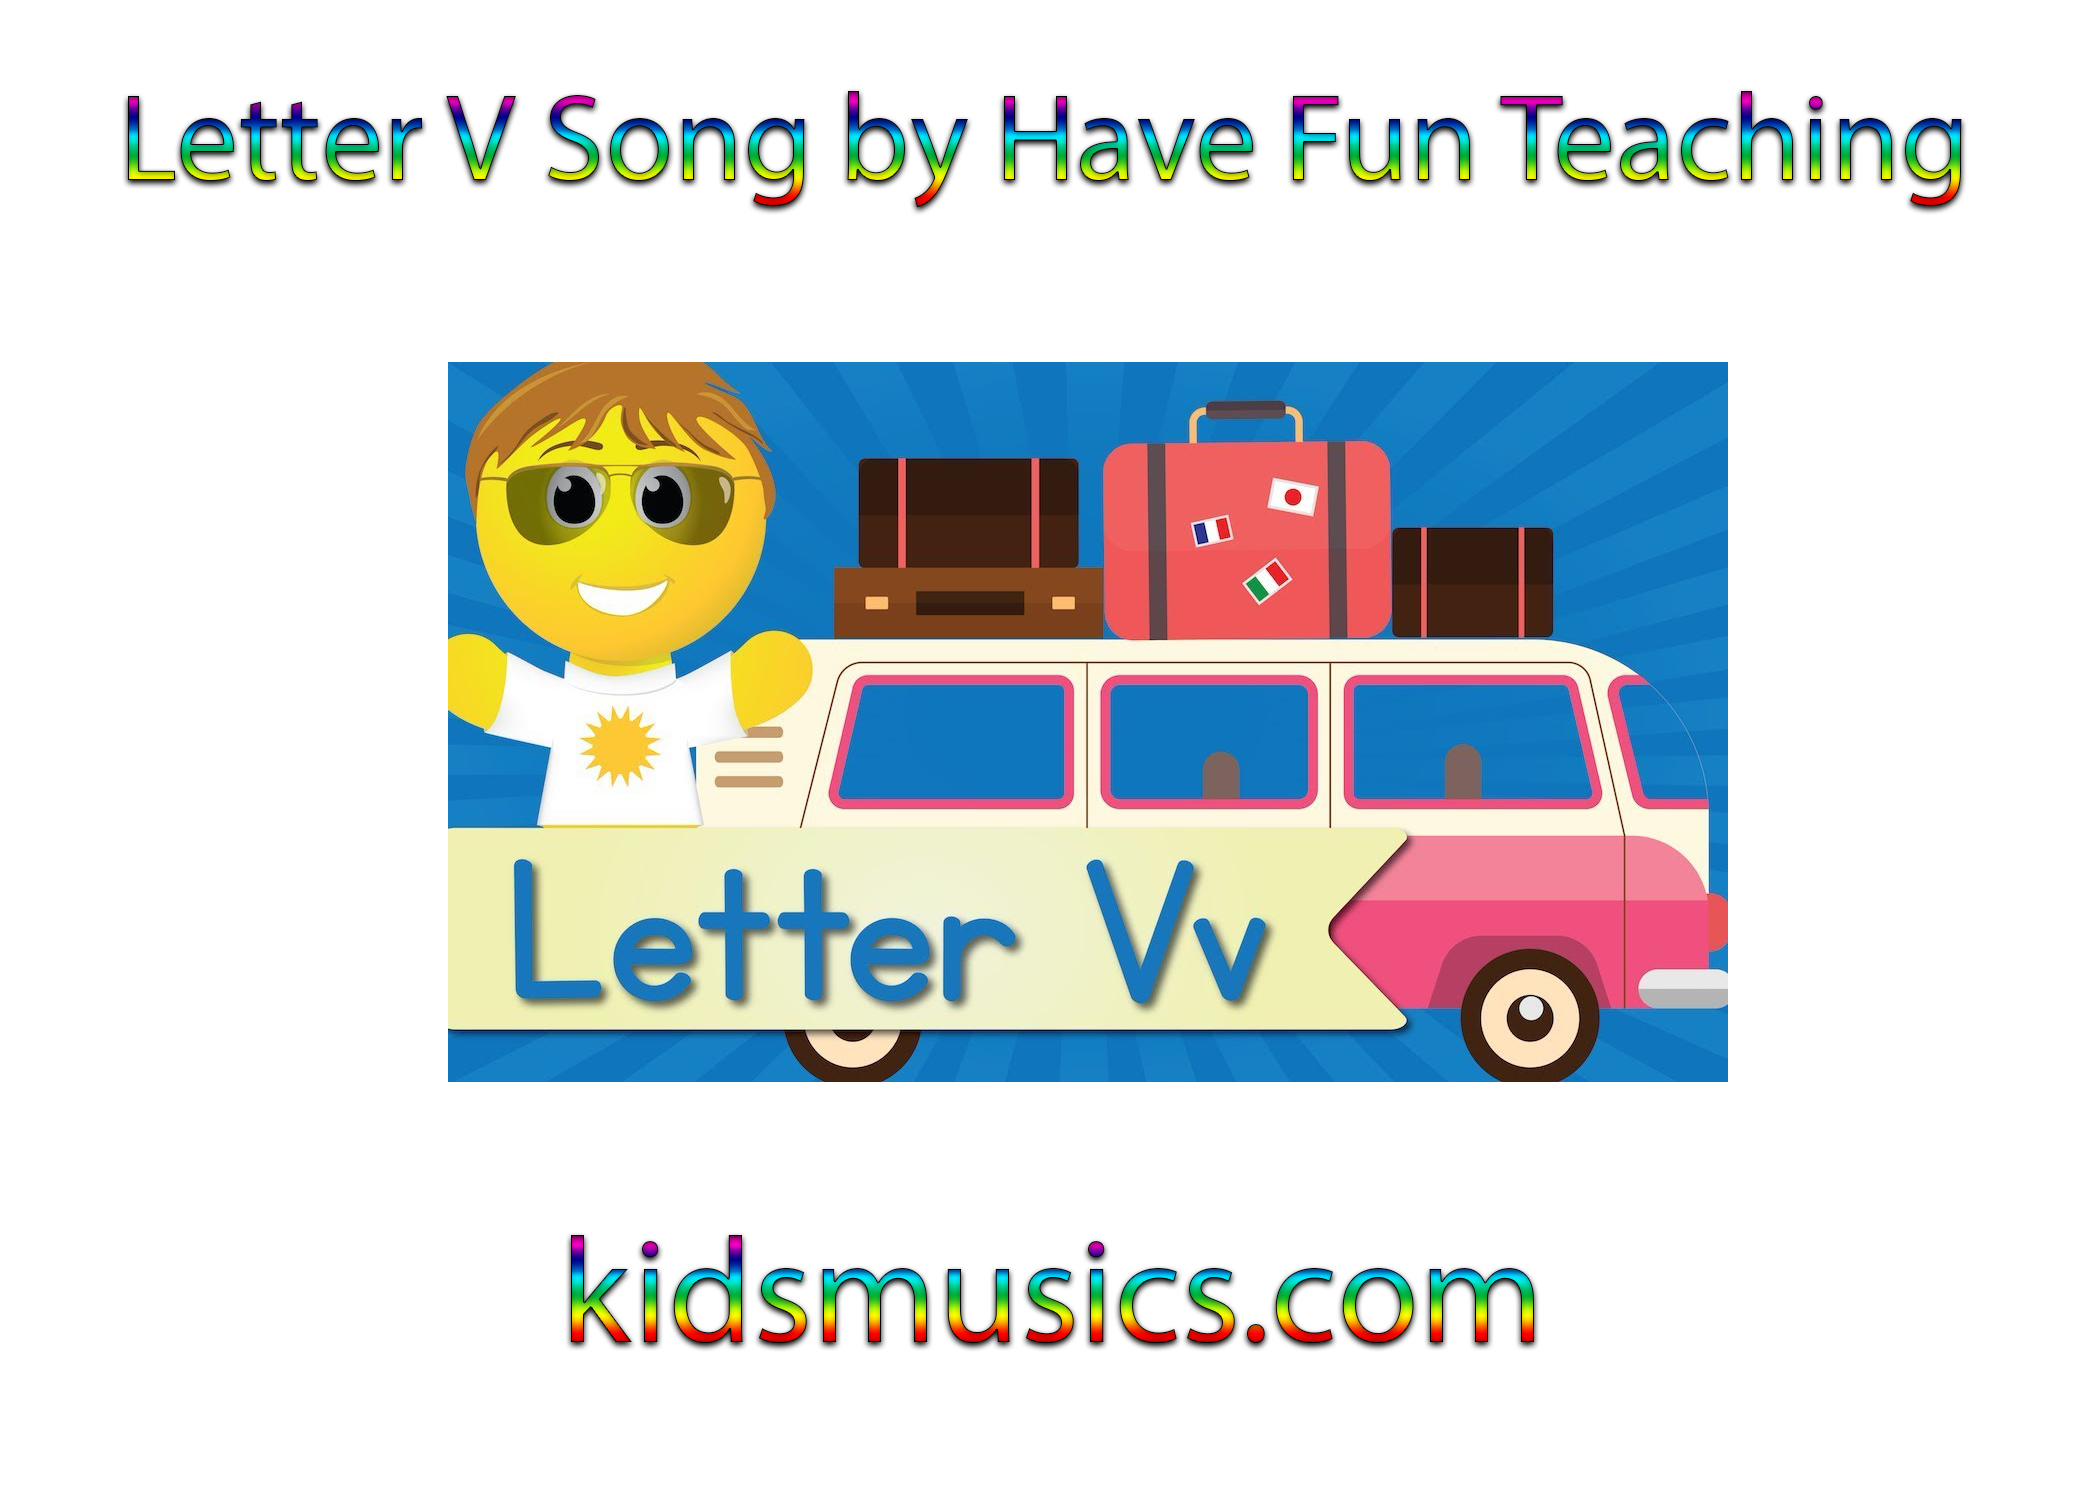 Letter V Song by Have Fun Teaching